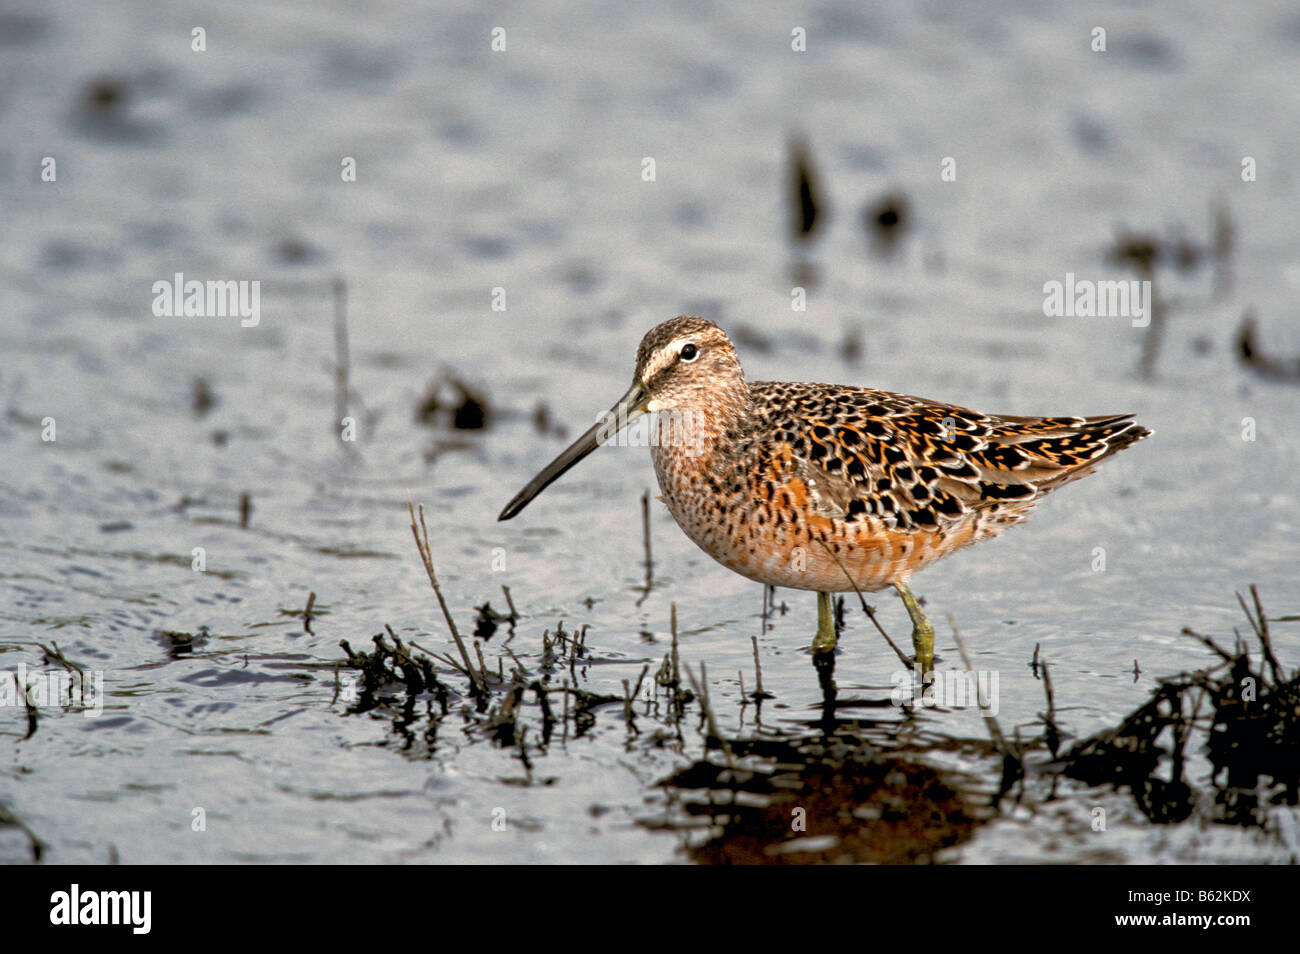 Short-billed Dowitcher Limnodromus griseus Crystal Beach TEXAS United States April Adult Scolopacidae Stock Photo